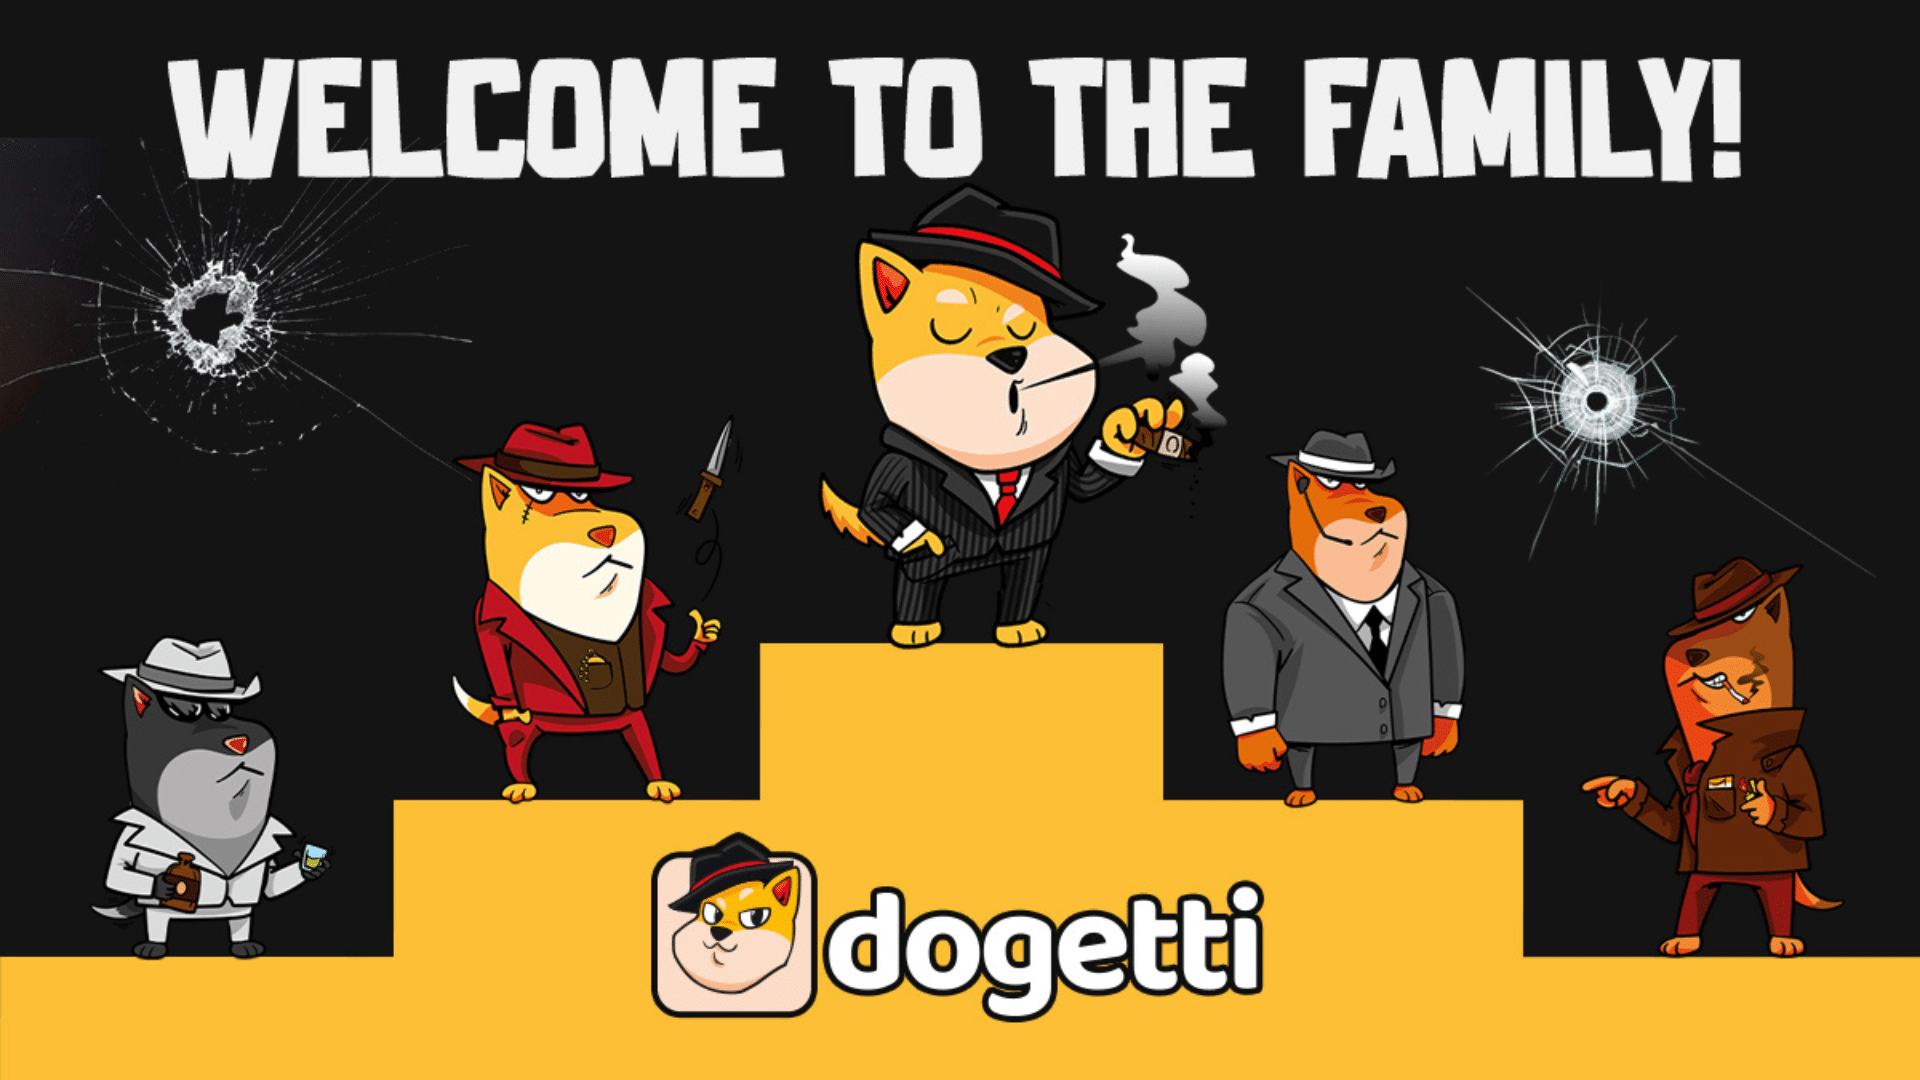 From Premier League wins to leading NFT teams, Arsenal FC, Dogetti stands out as a priority